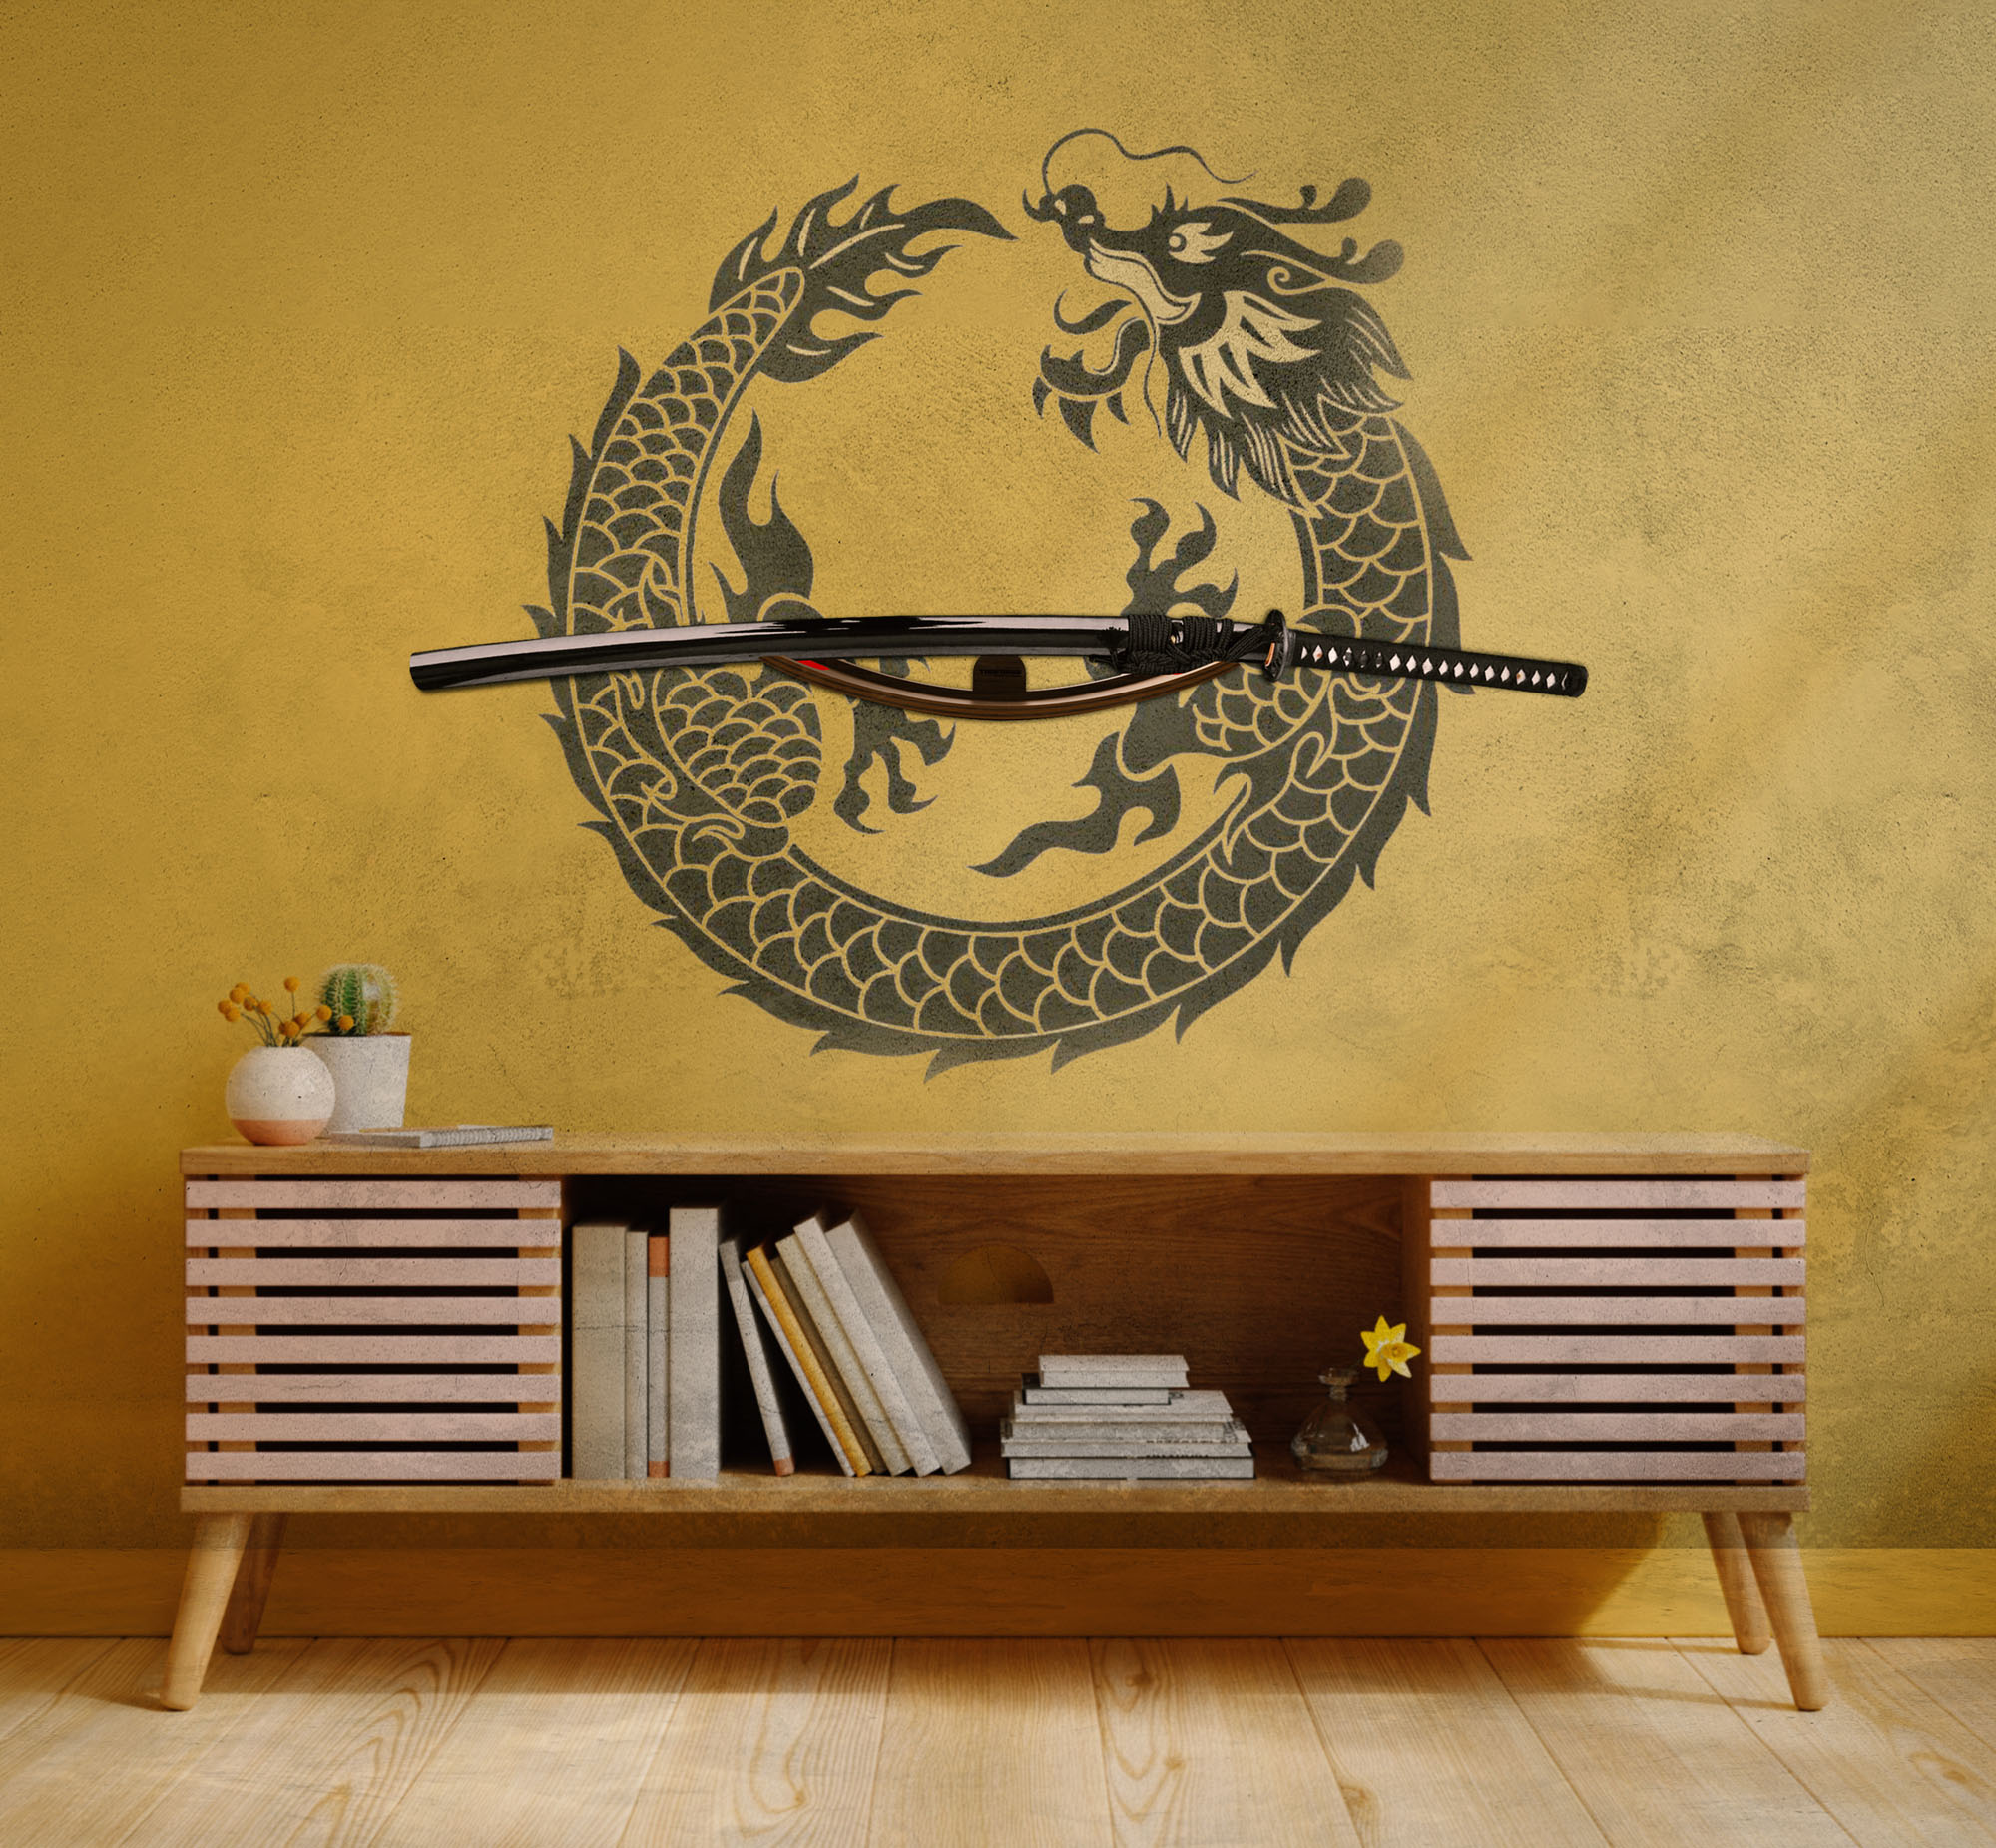 Design wall mount for a sword - brown